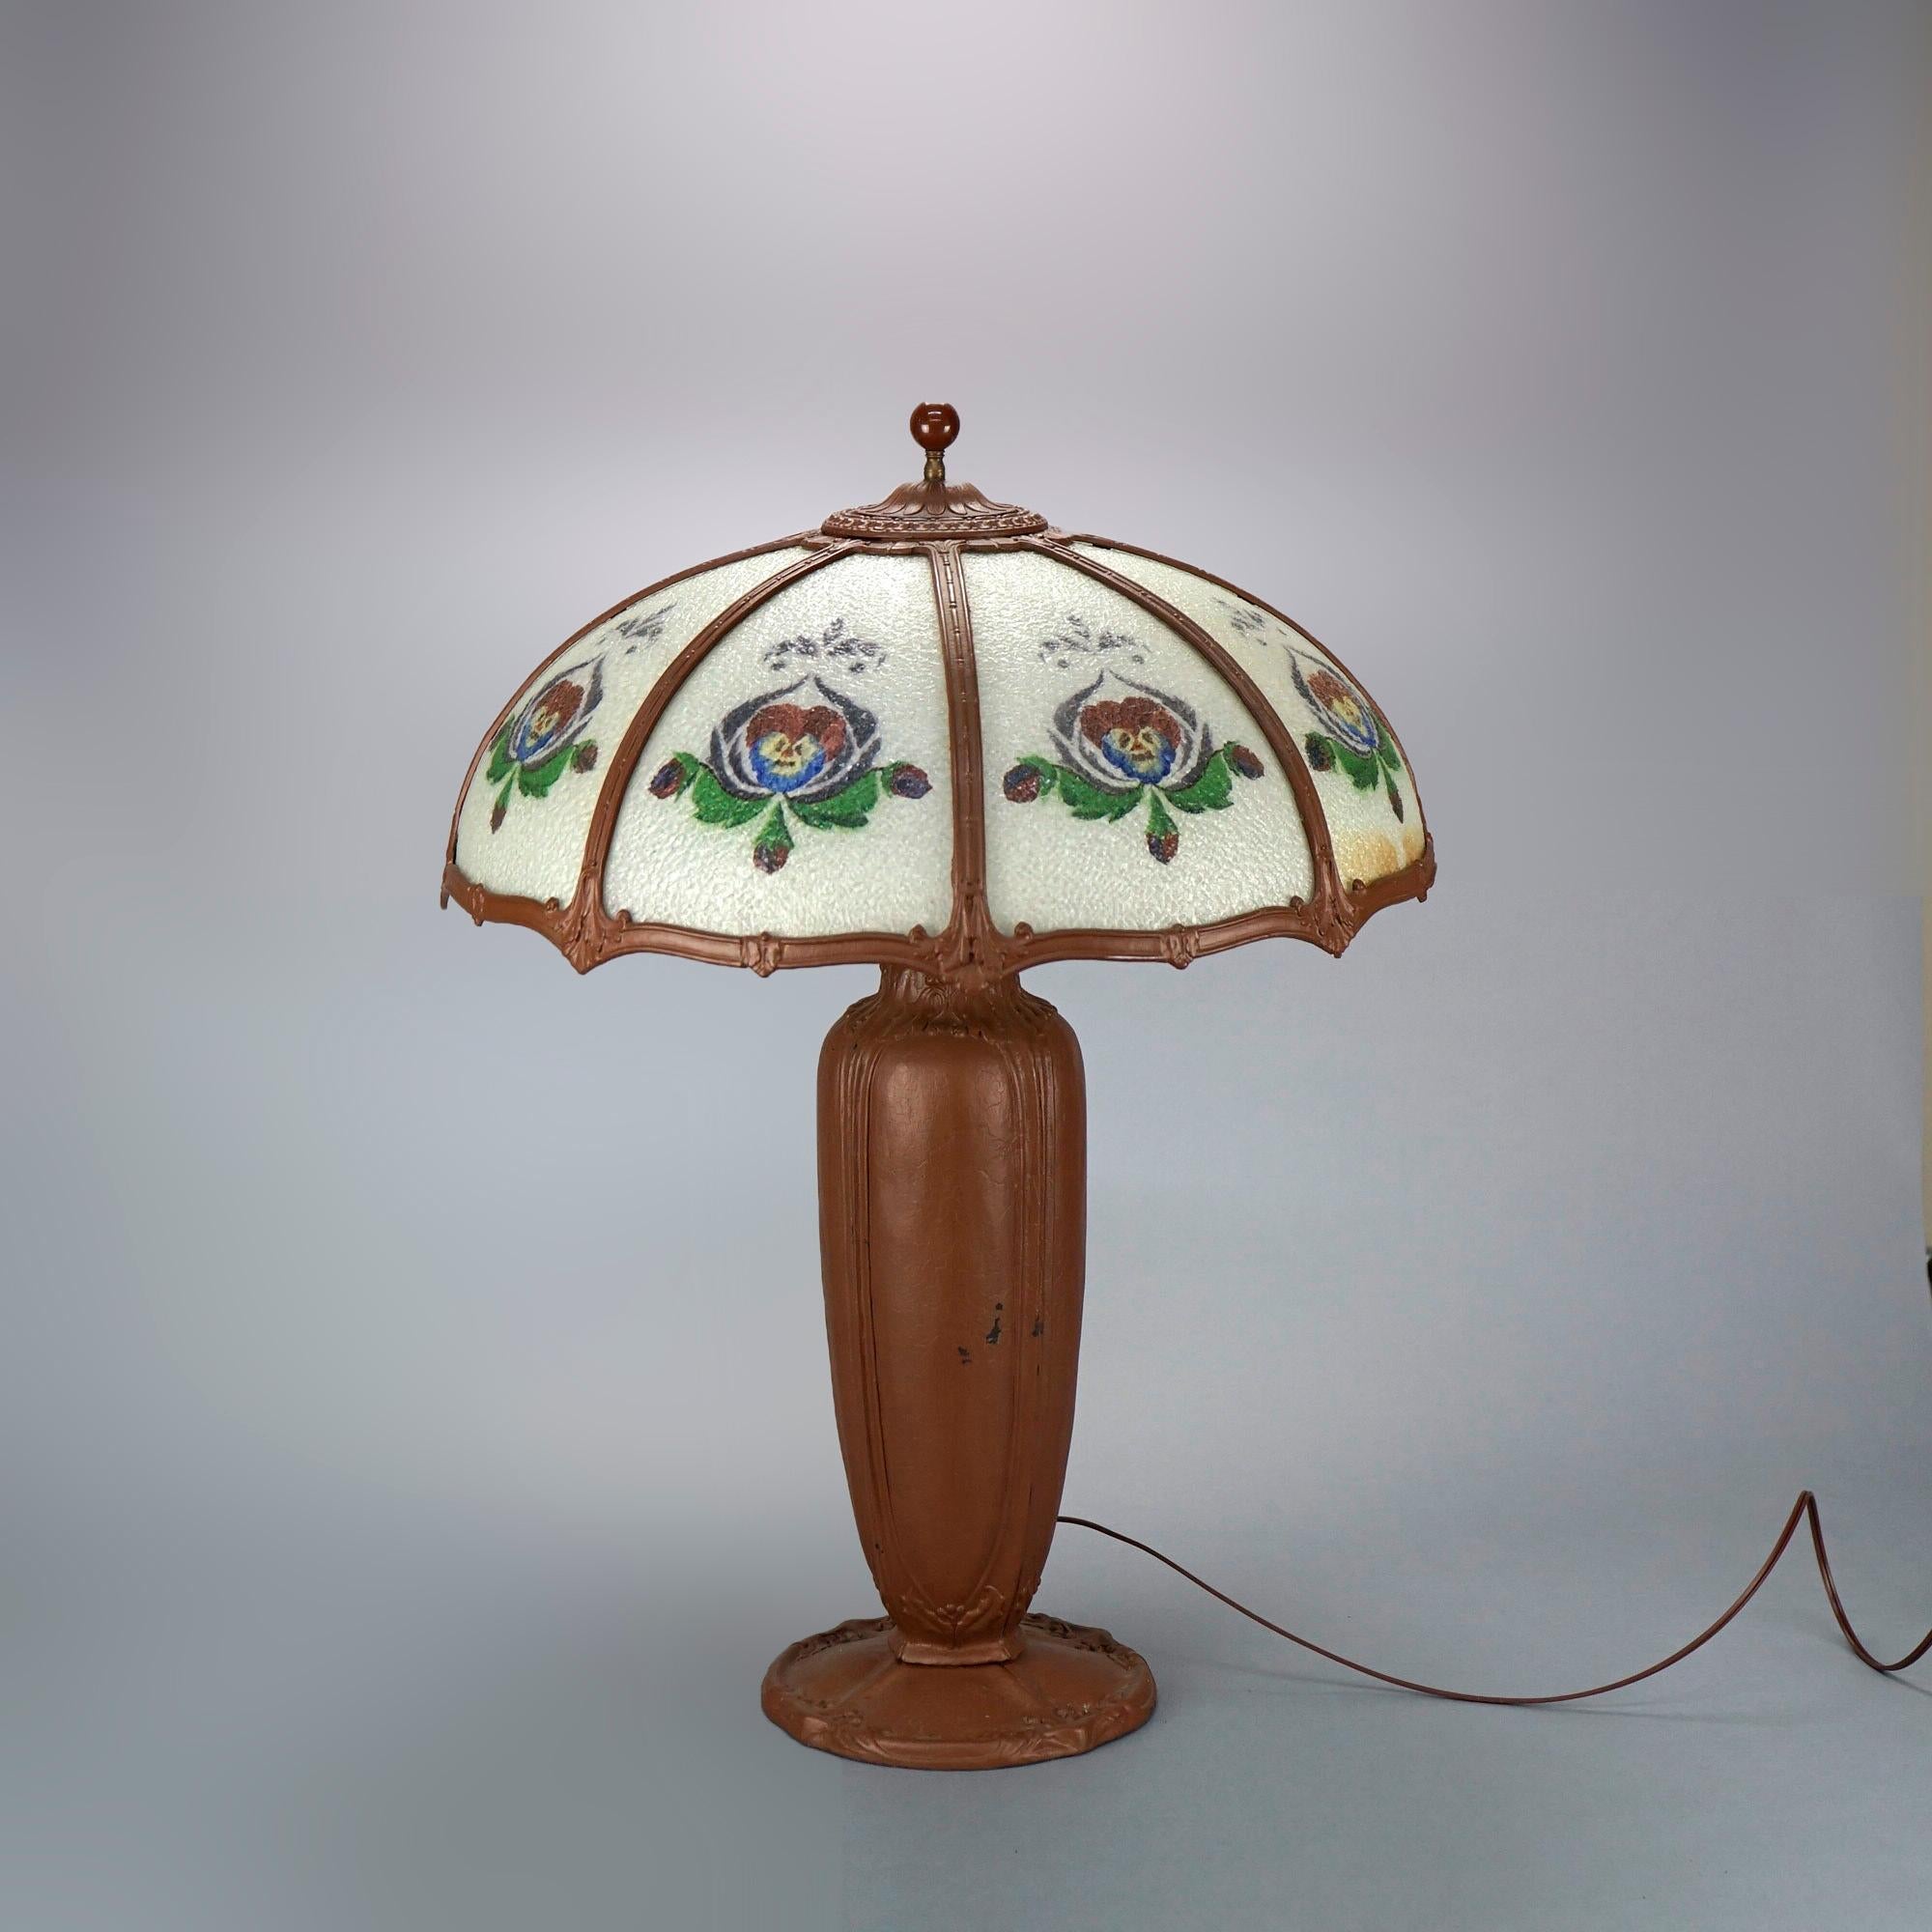 A large antique table lamp in the manner of Bradley and Hubbard offers dome form shade housing bent glass panels with reverse painted stylized flowers, over urn form triple socket base, c1920

Measures- 28''H x 20.75''W x 20.75''D

Catalogue Note: